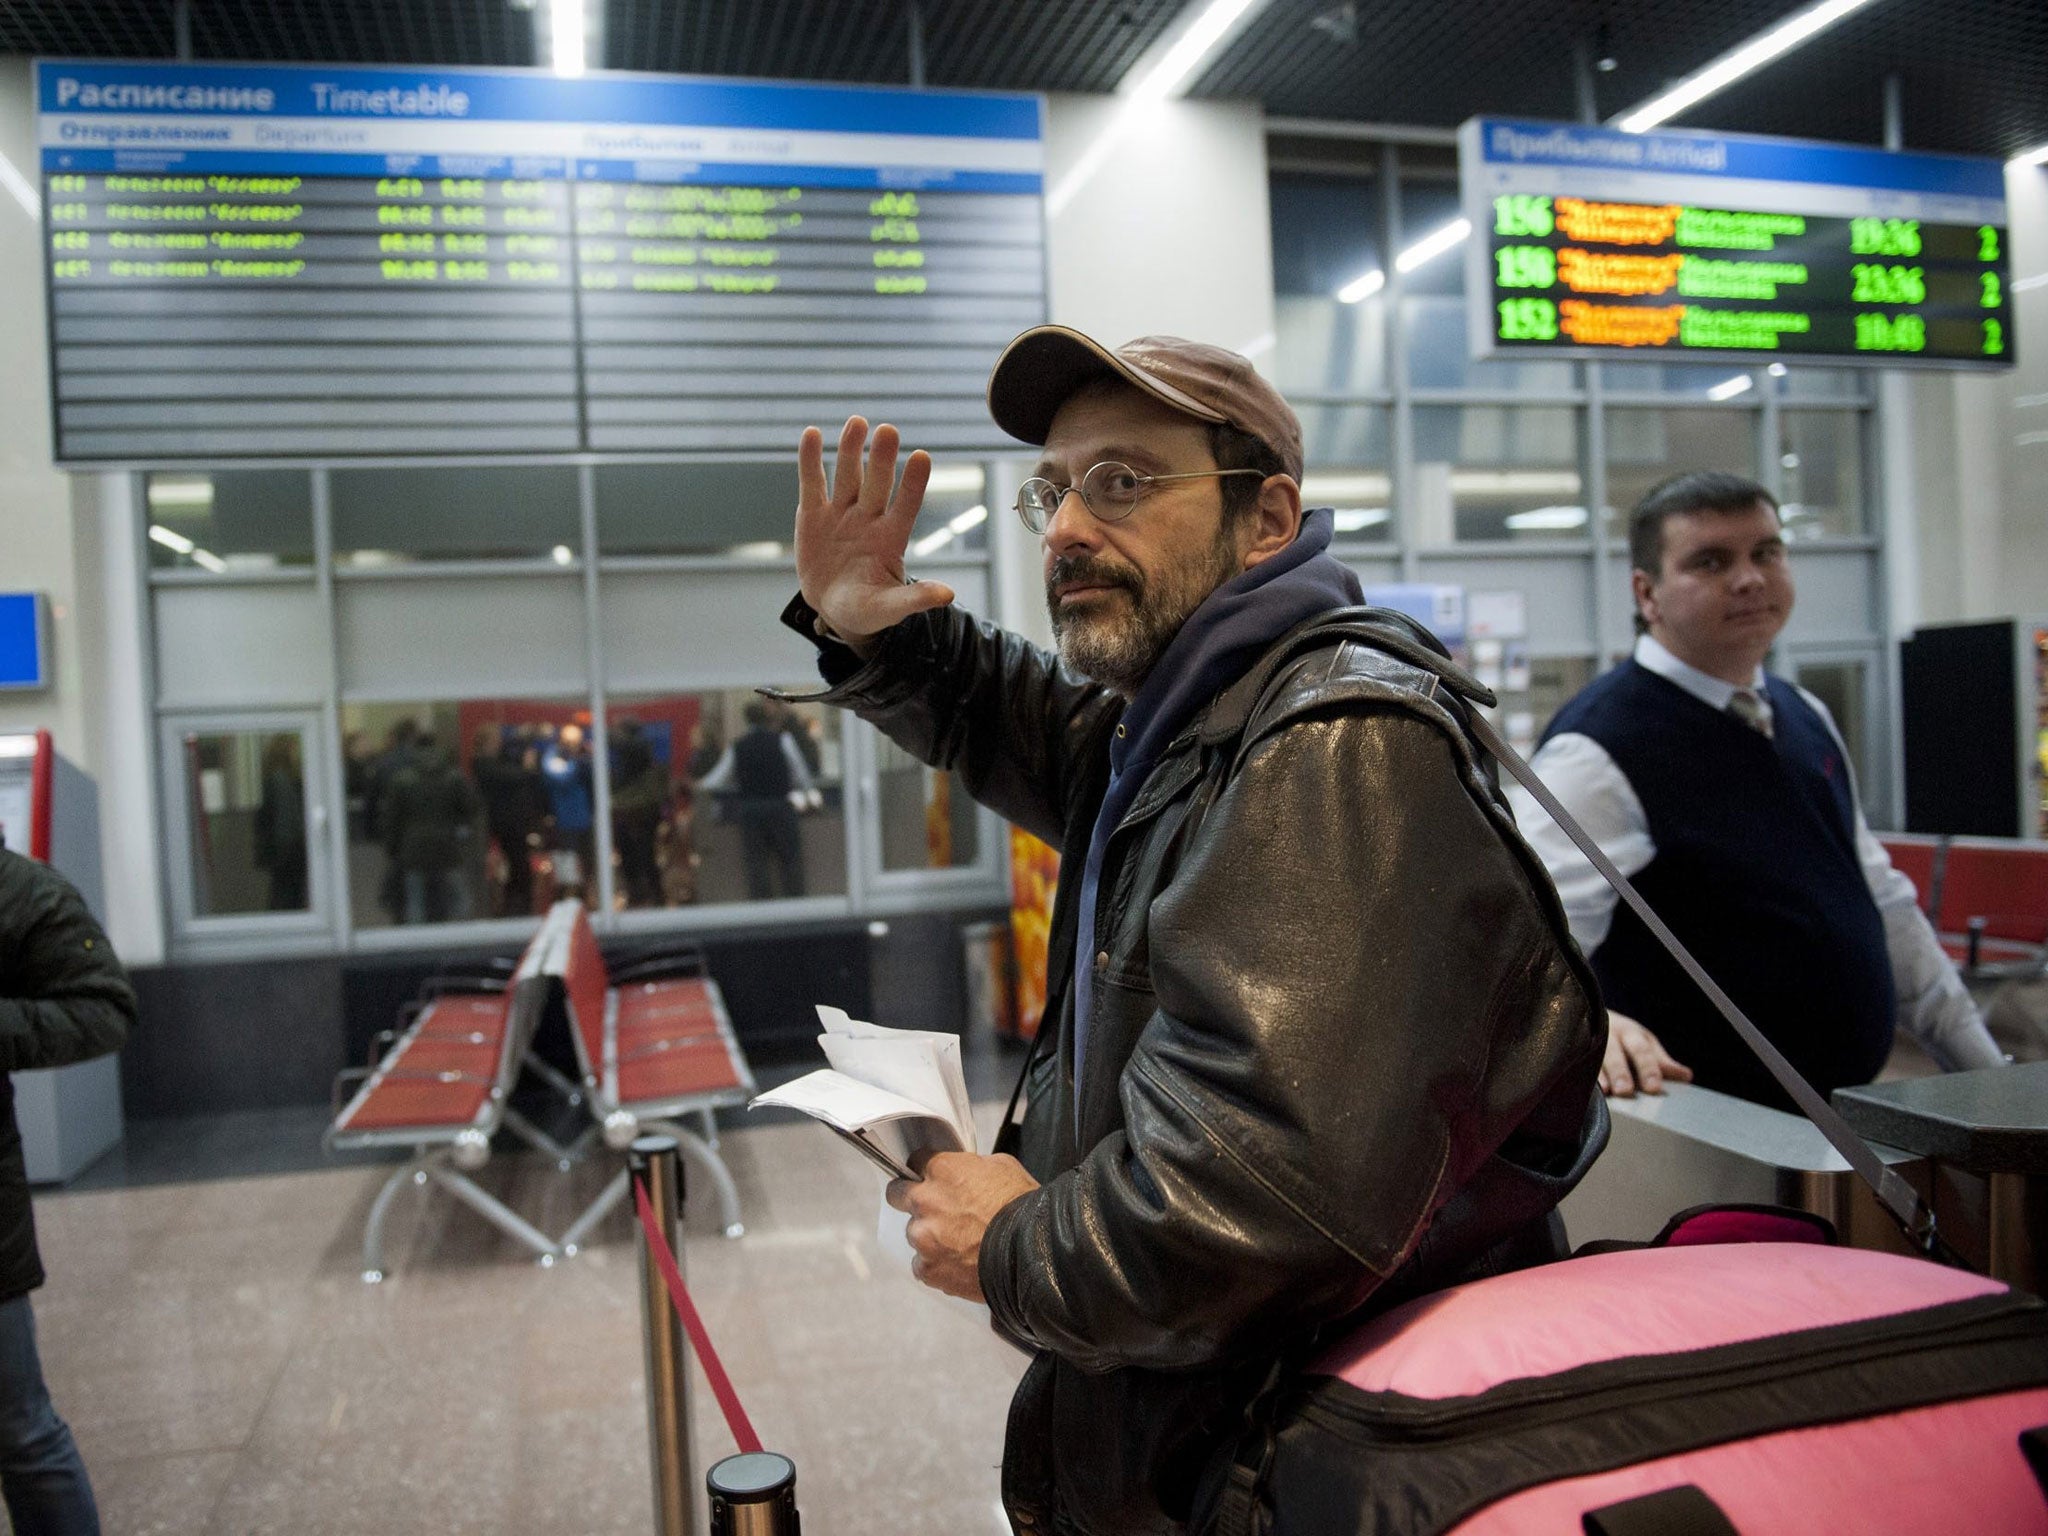 Dima Litvinov became the first member of the so-called 'Arctic 30' to leave Russia; boarding a train at a railway station in St. Petersburg